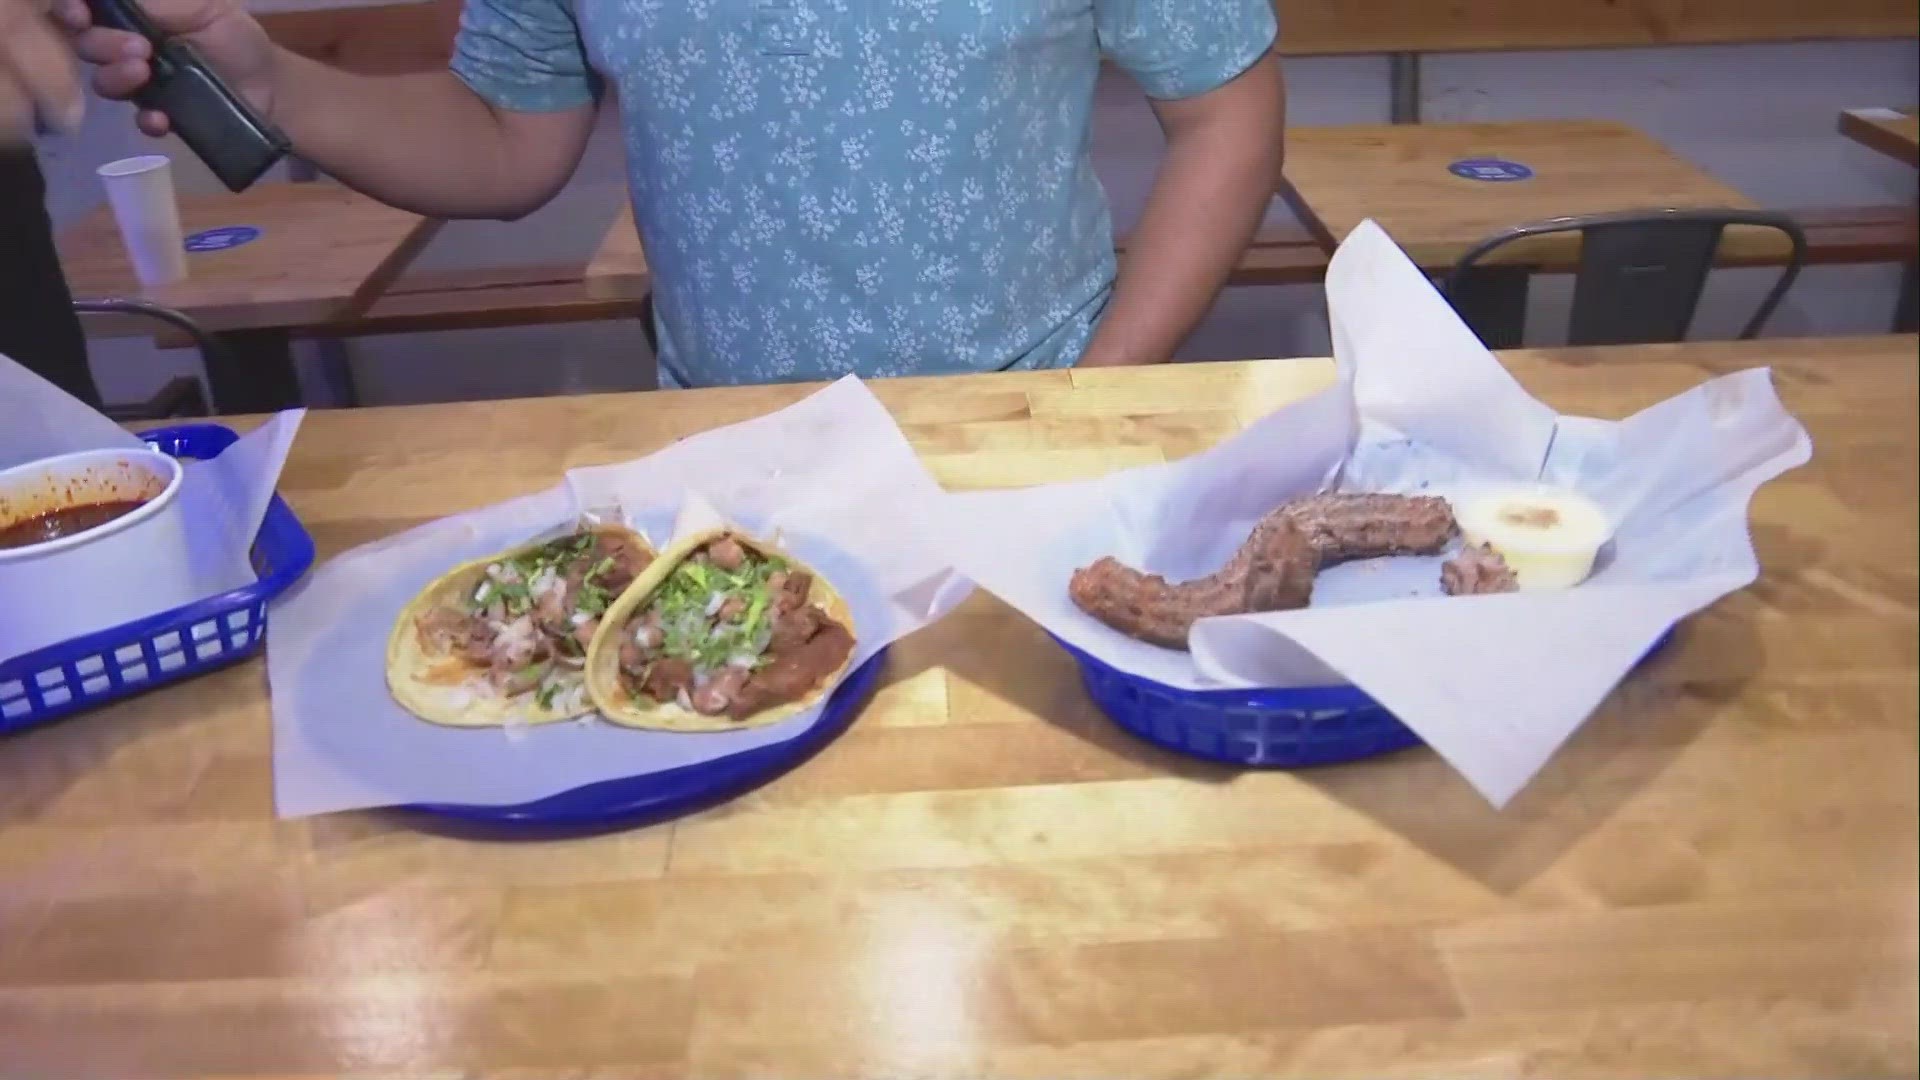 Taco Centro has everything from breakfast burritos to nachos to tacos and everything in between! Check them out at 539 Island Ave. in San Diego.